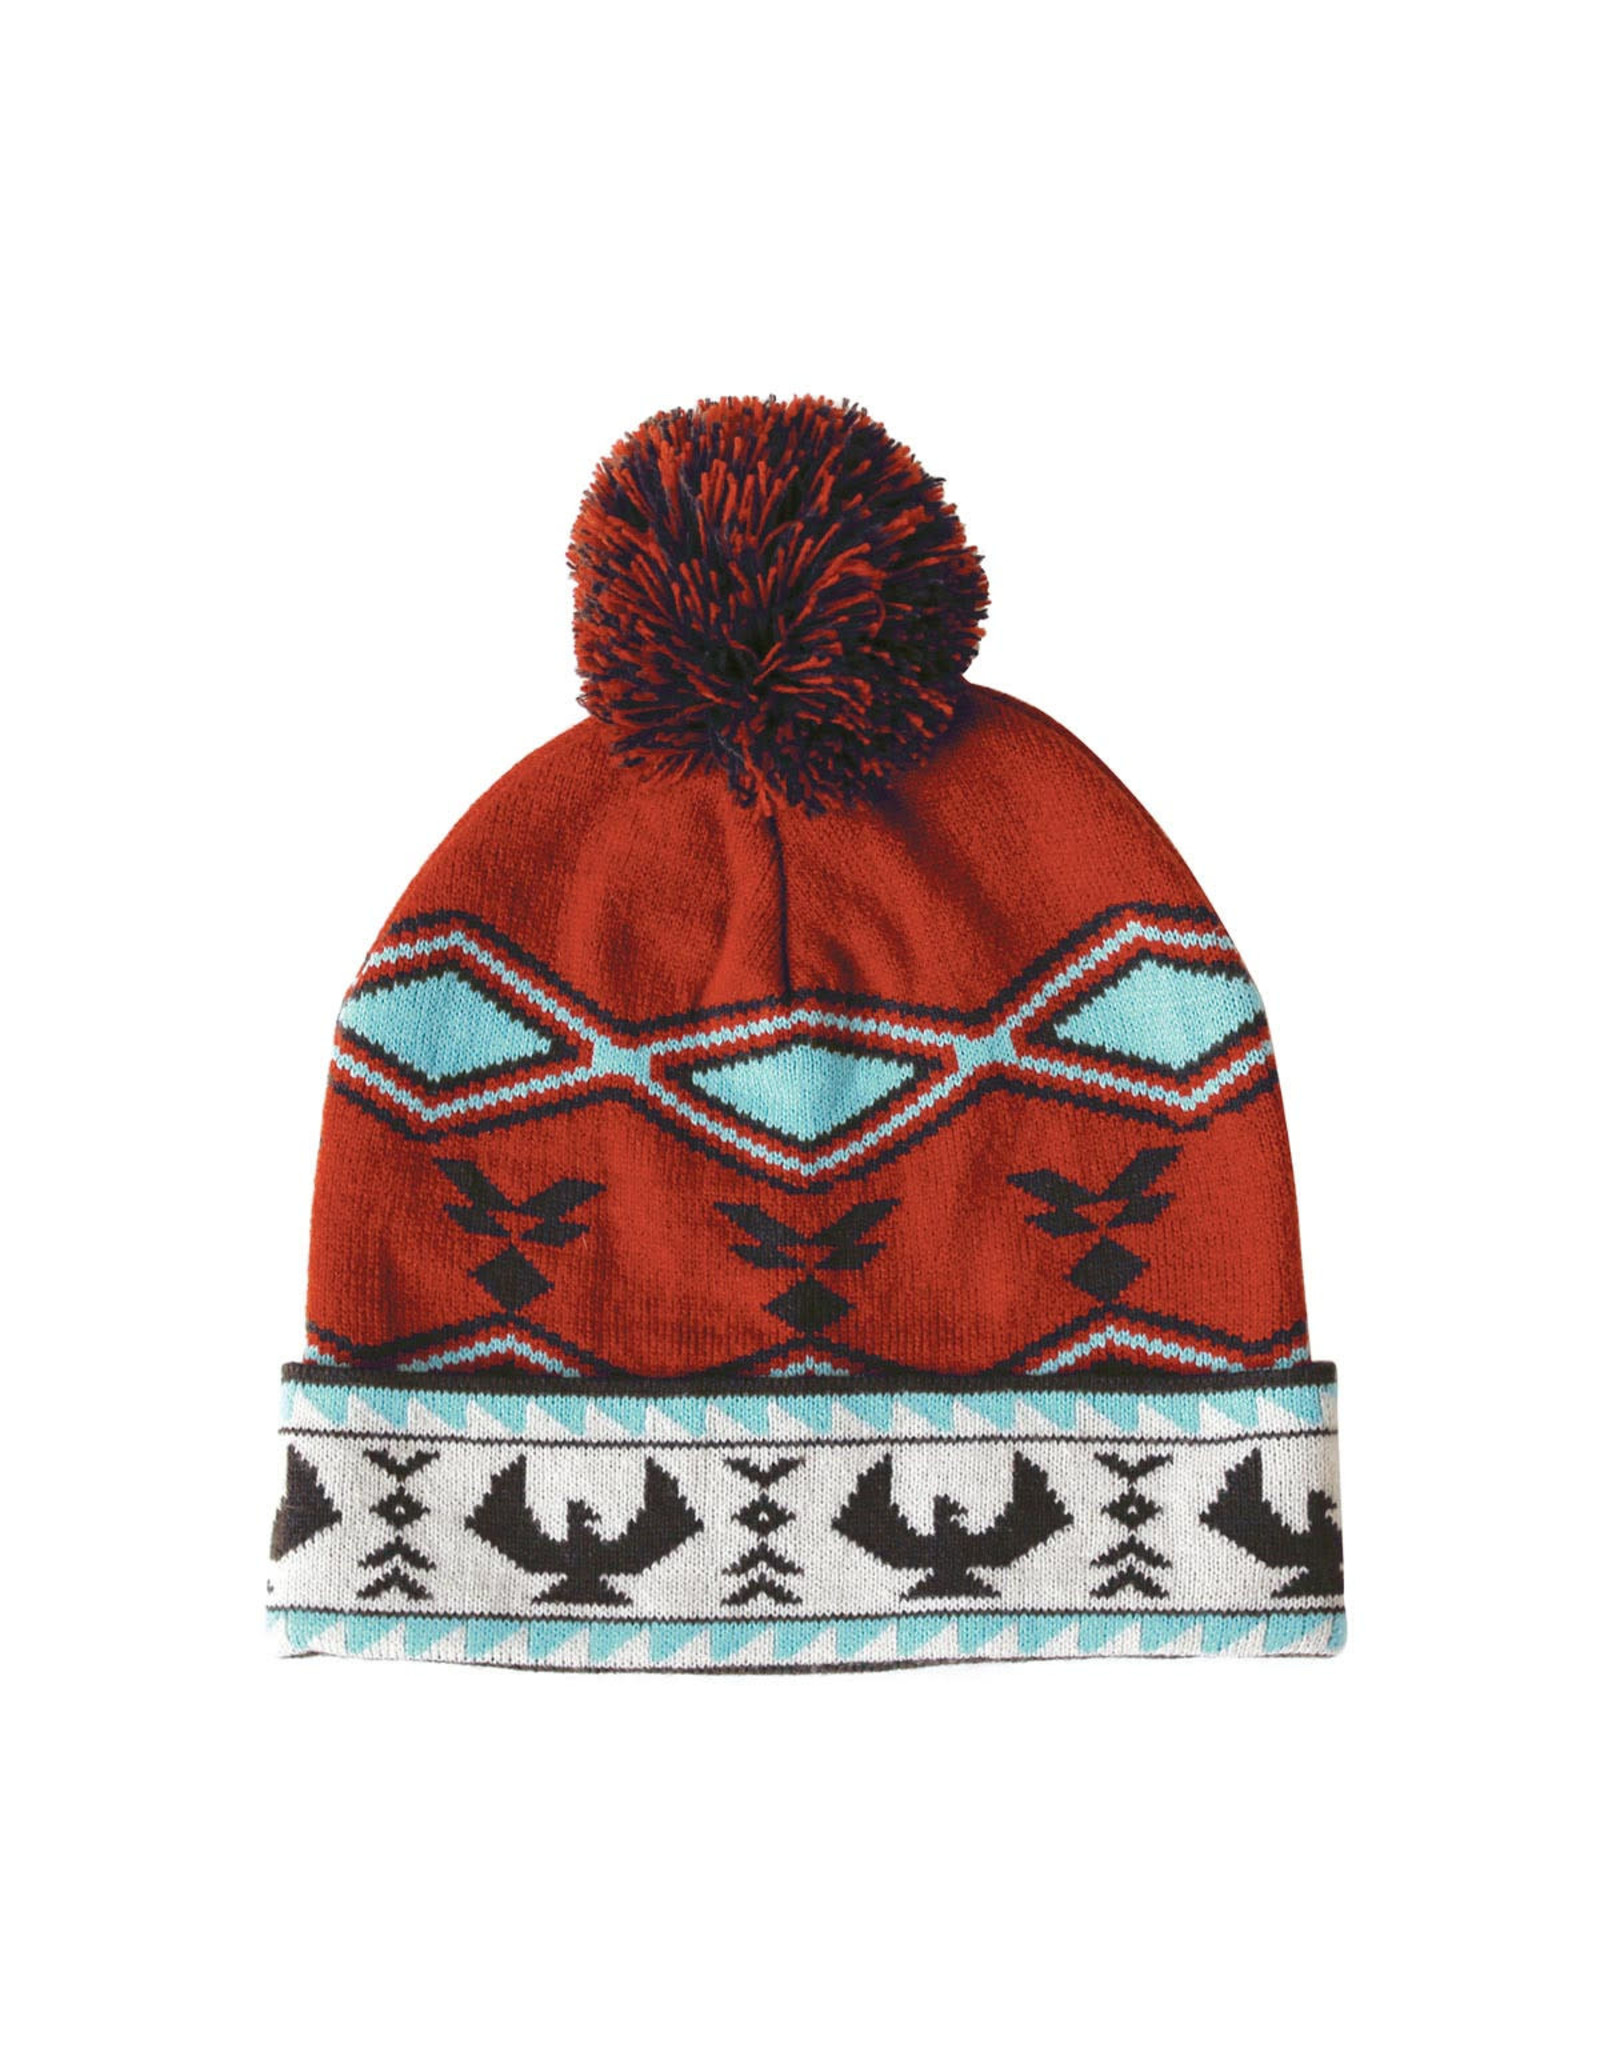 Knitted Tuque with Pom Pom - Salish Weaving Collection - Spirit of the Sky by Leila Stogan (TQSSS)